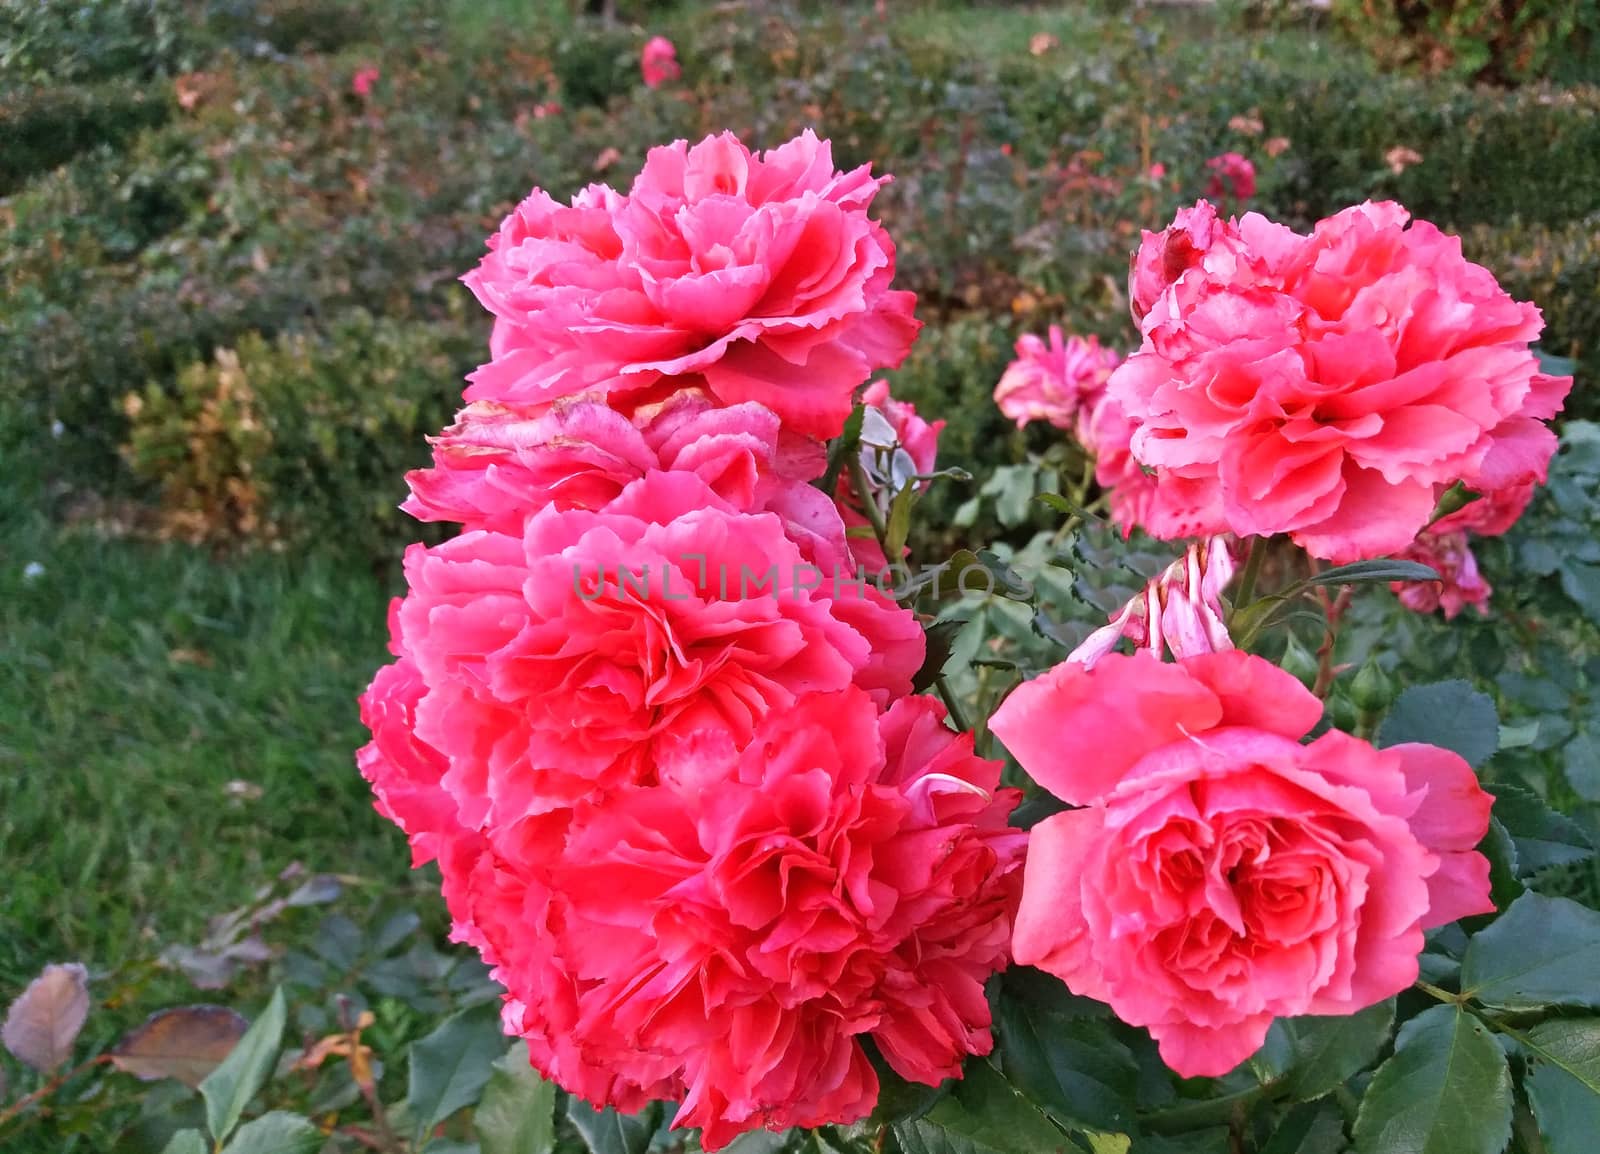 Roses bloom in pink very beautiful close up.